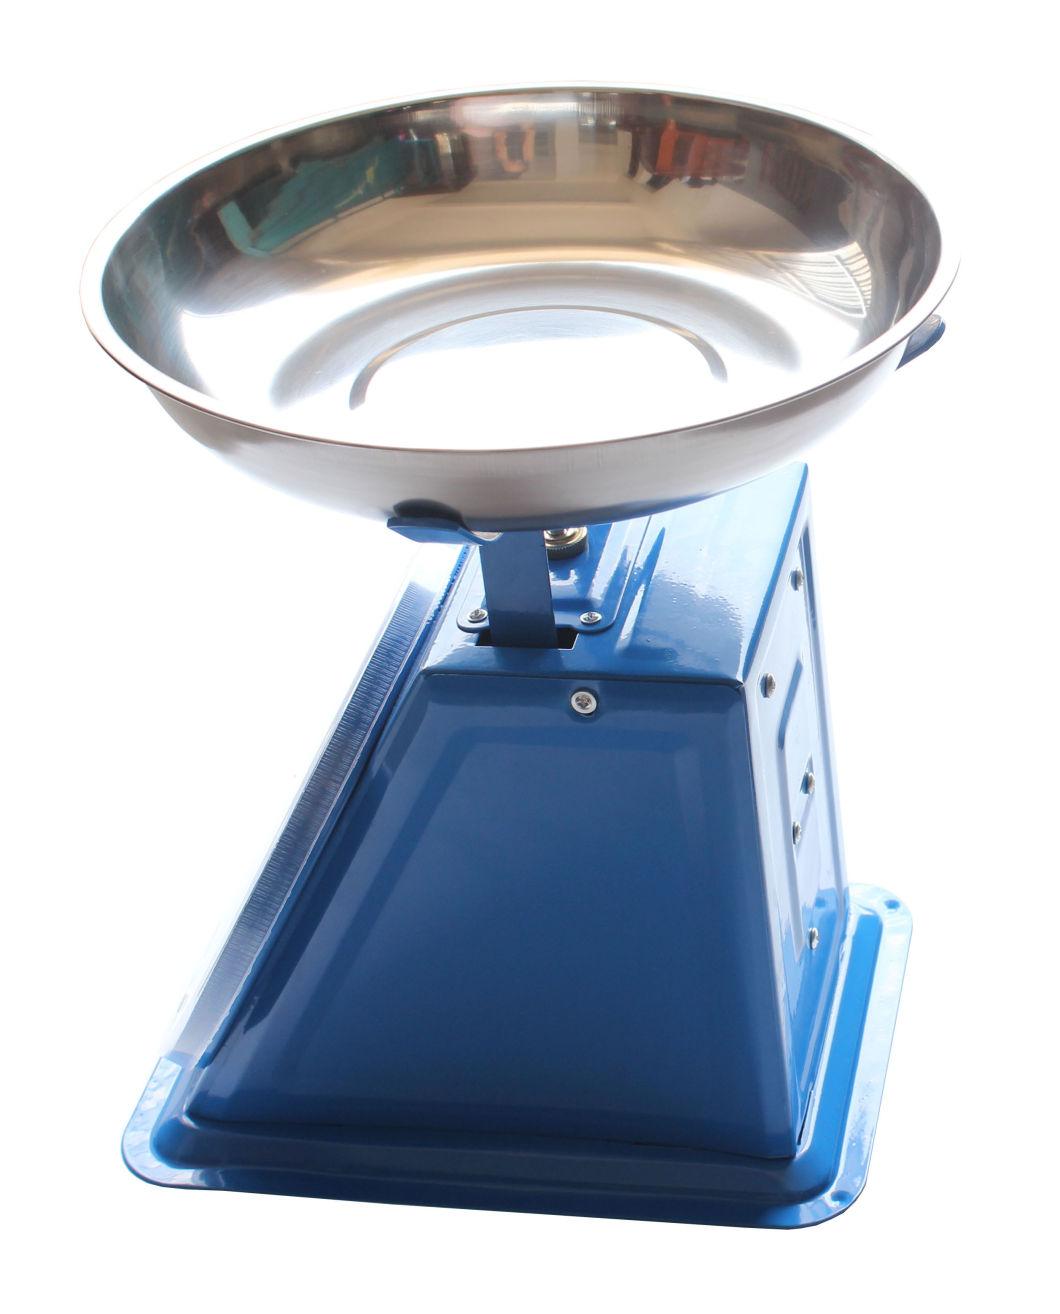 Hot Sell Cheap Mechanical Dial Weighing Spring Scale